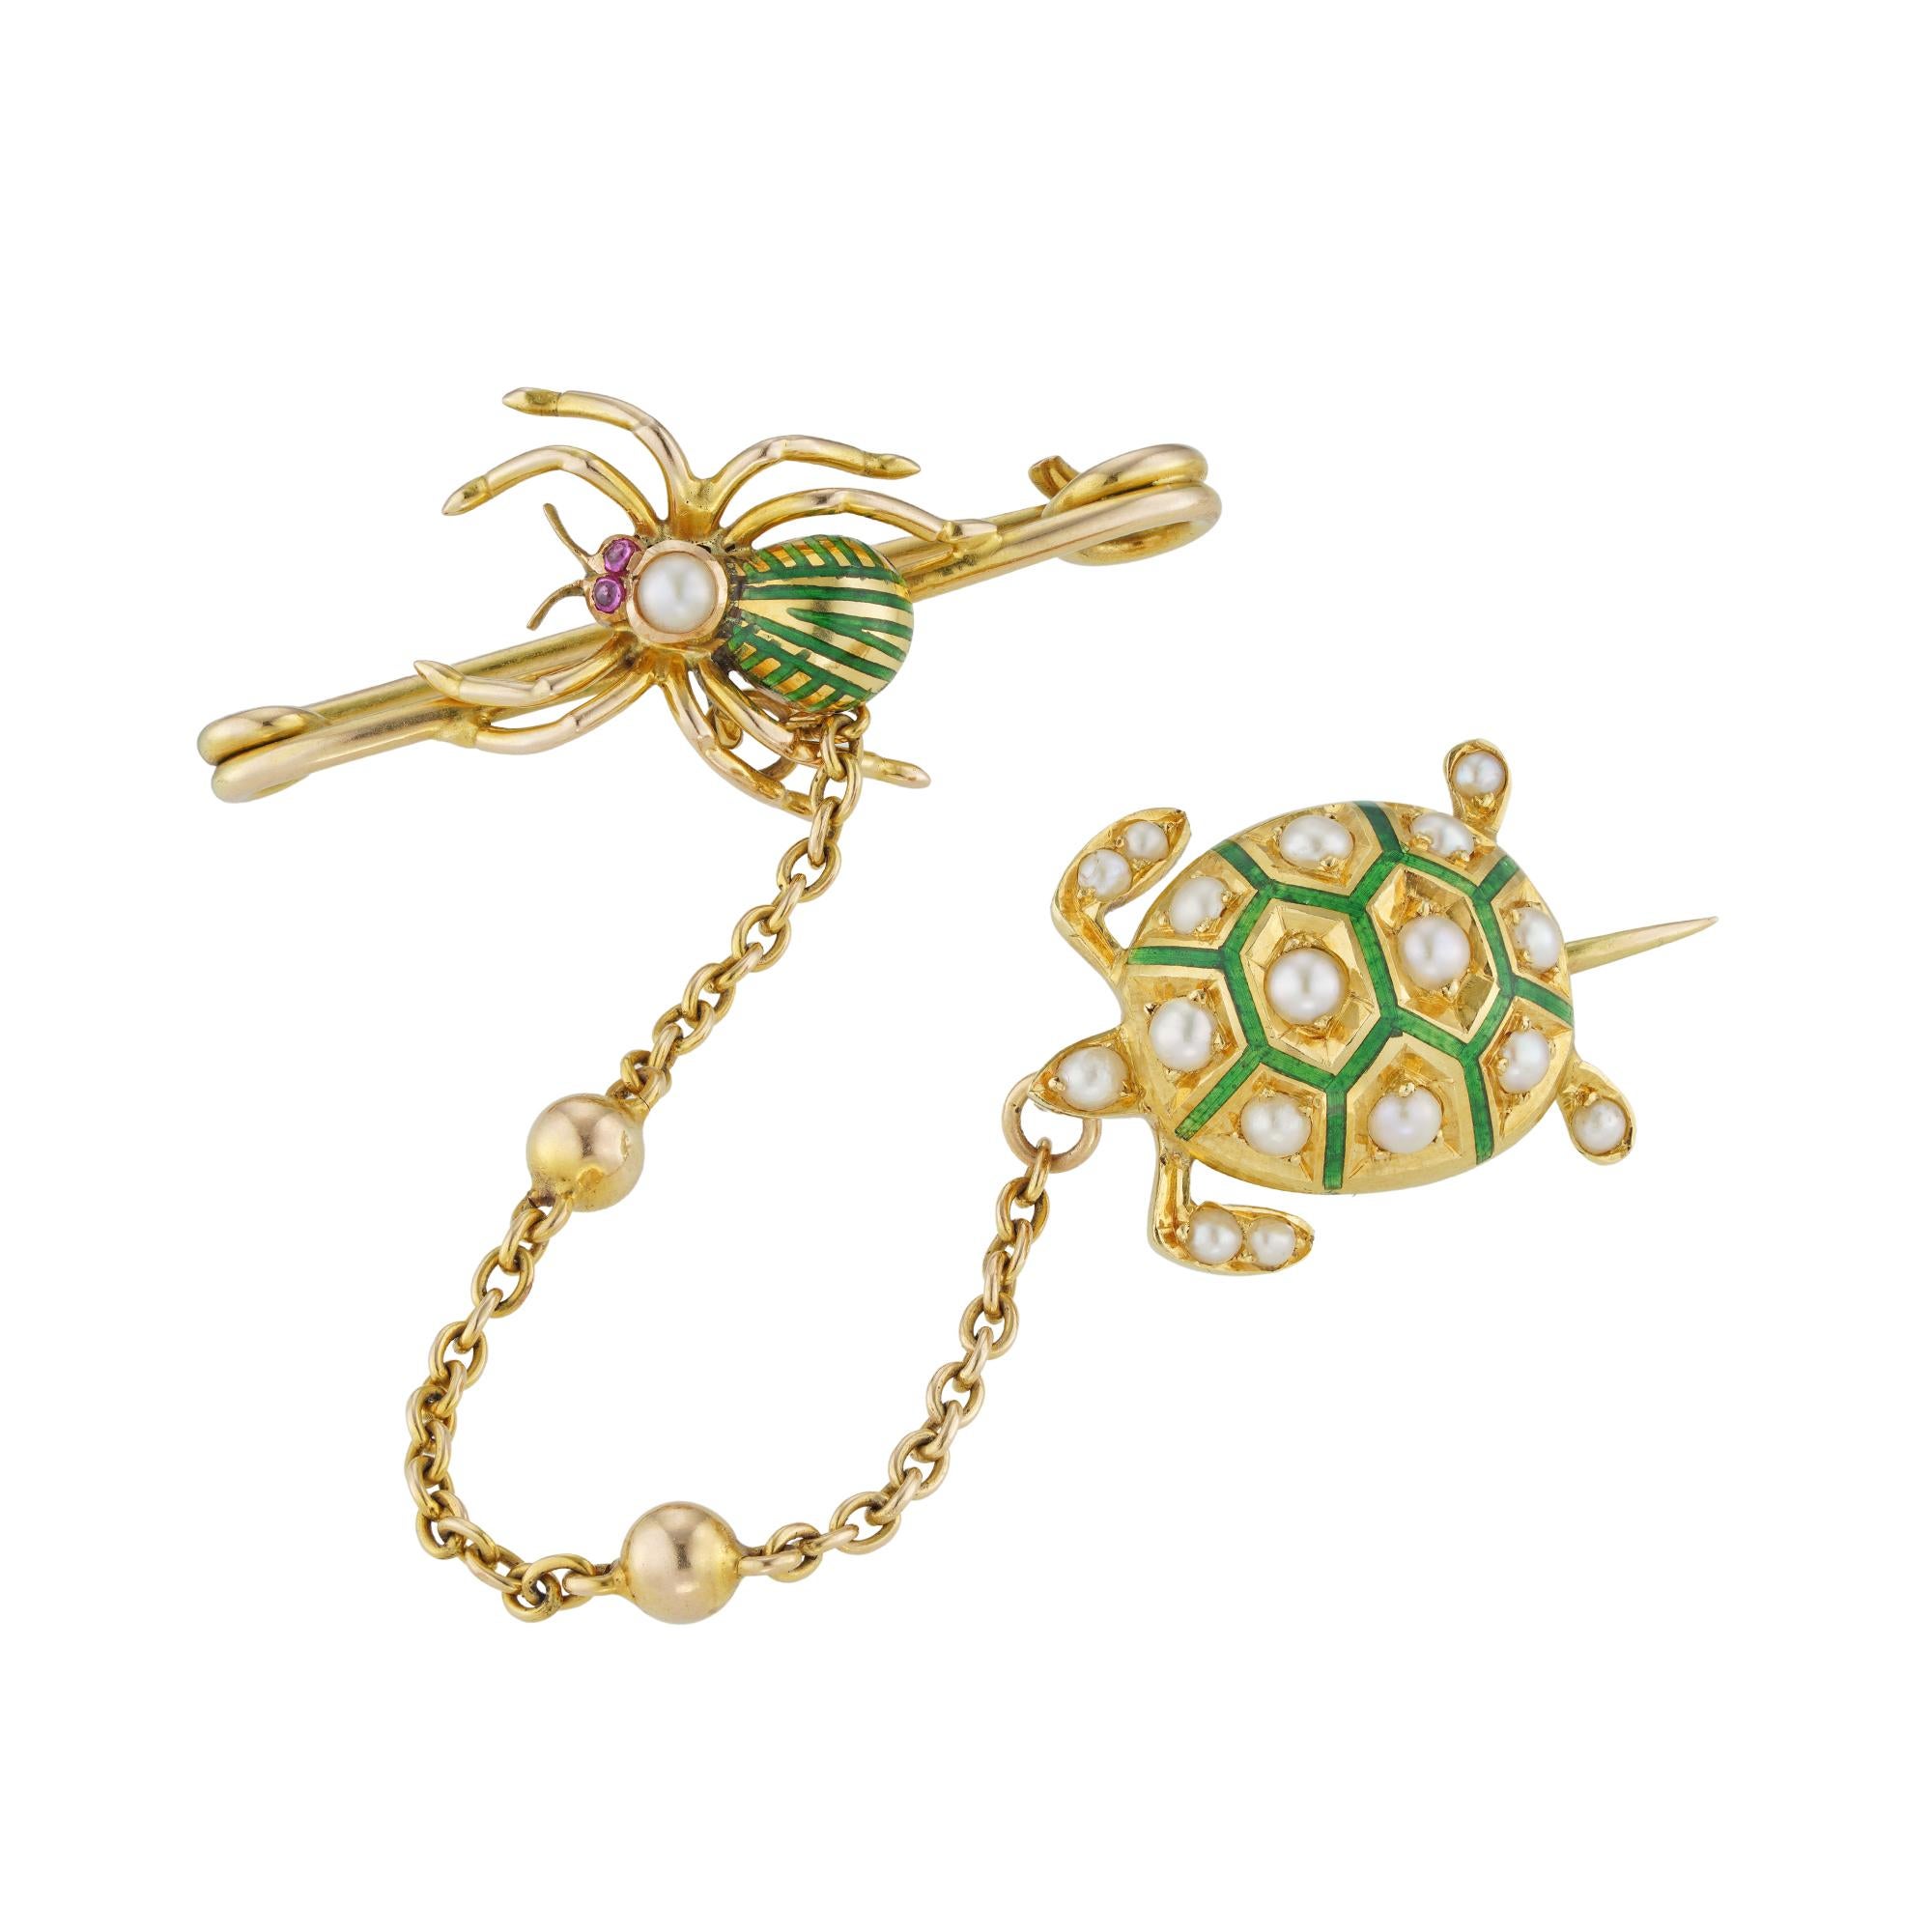 A turn of the century novelty scatter pin consisting of a green enamel and pearl set turtle, and green enamel and pearl spider with cabochon cut ruby eyes, all in 18ct yellow gold and linked by an oval chain, linked with two small gold balls, the